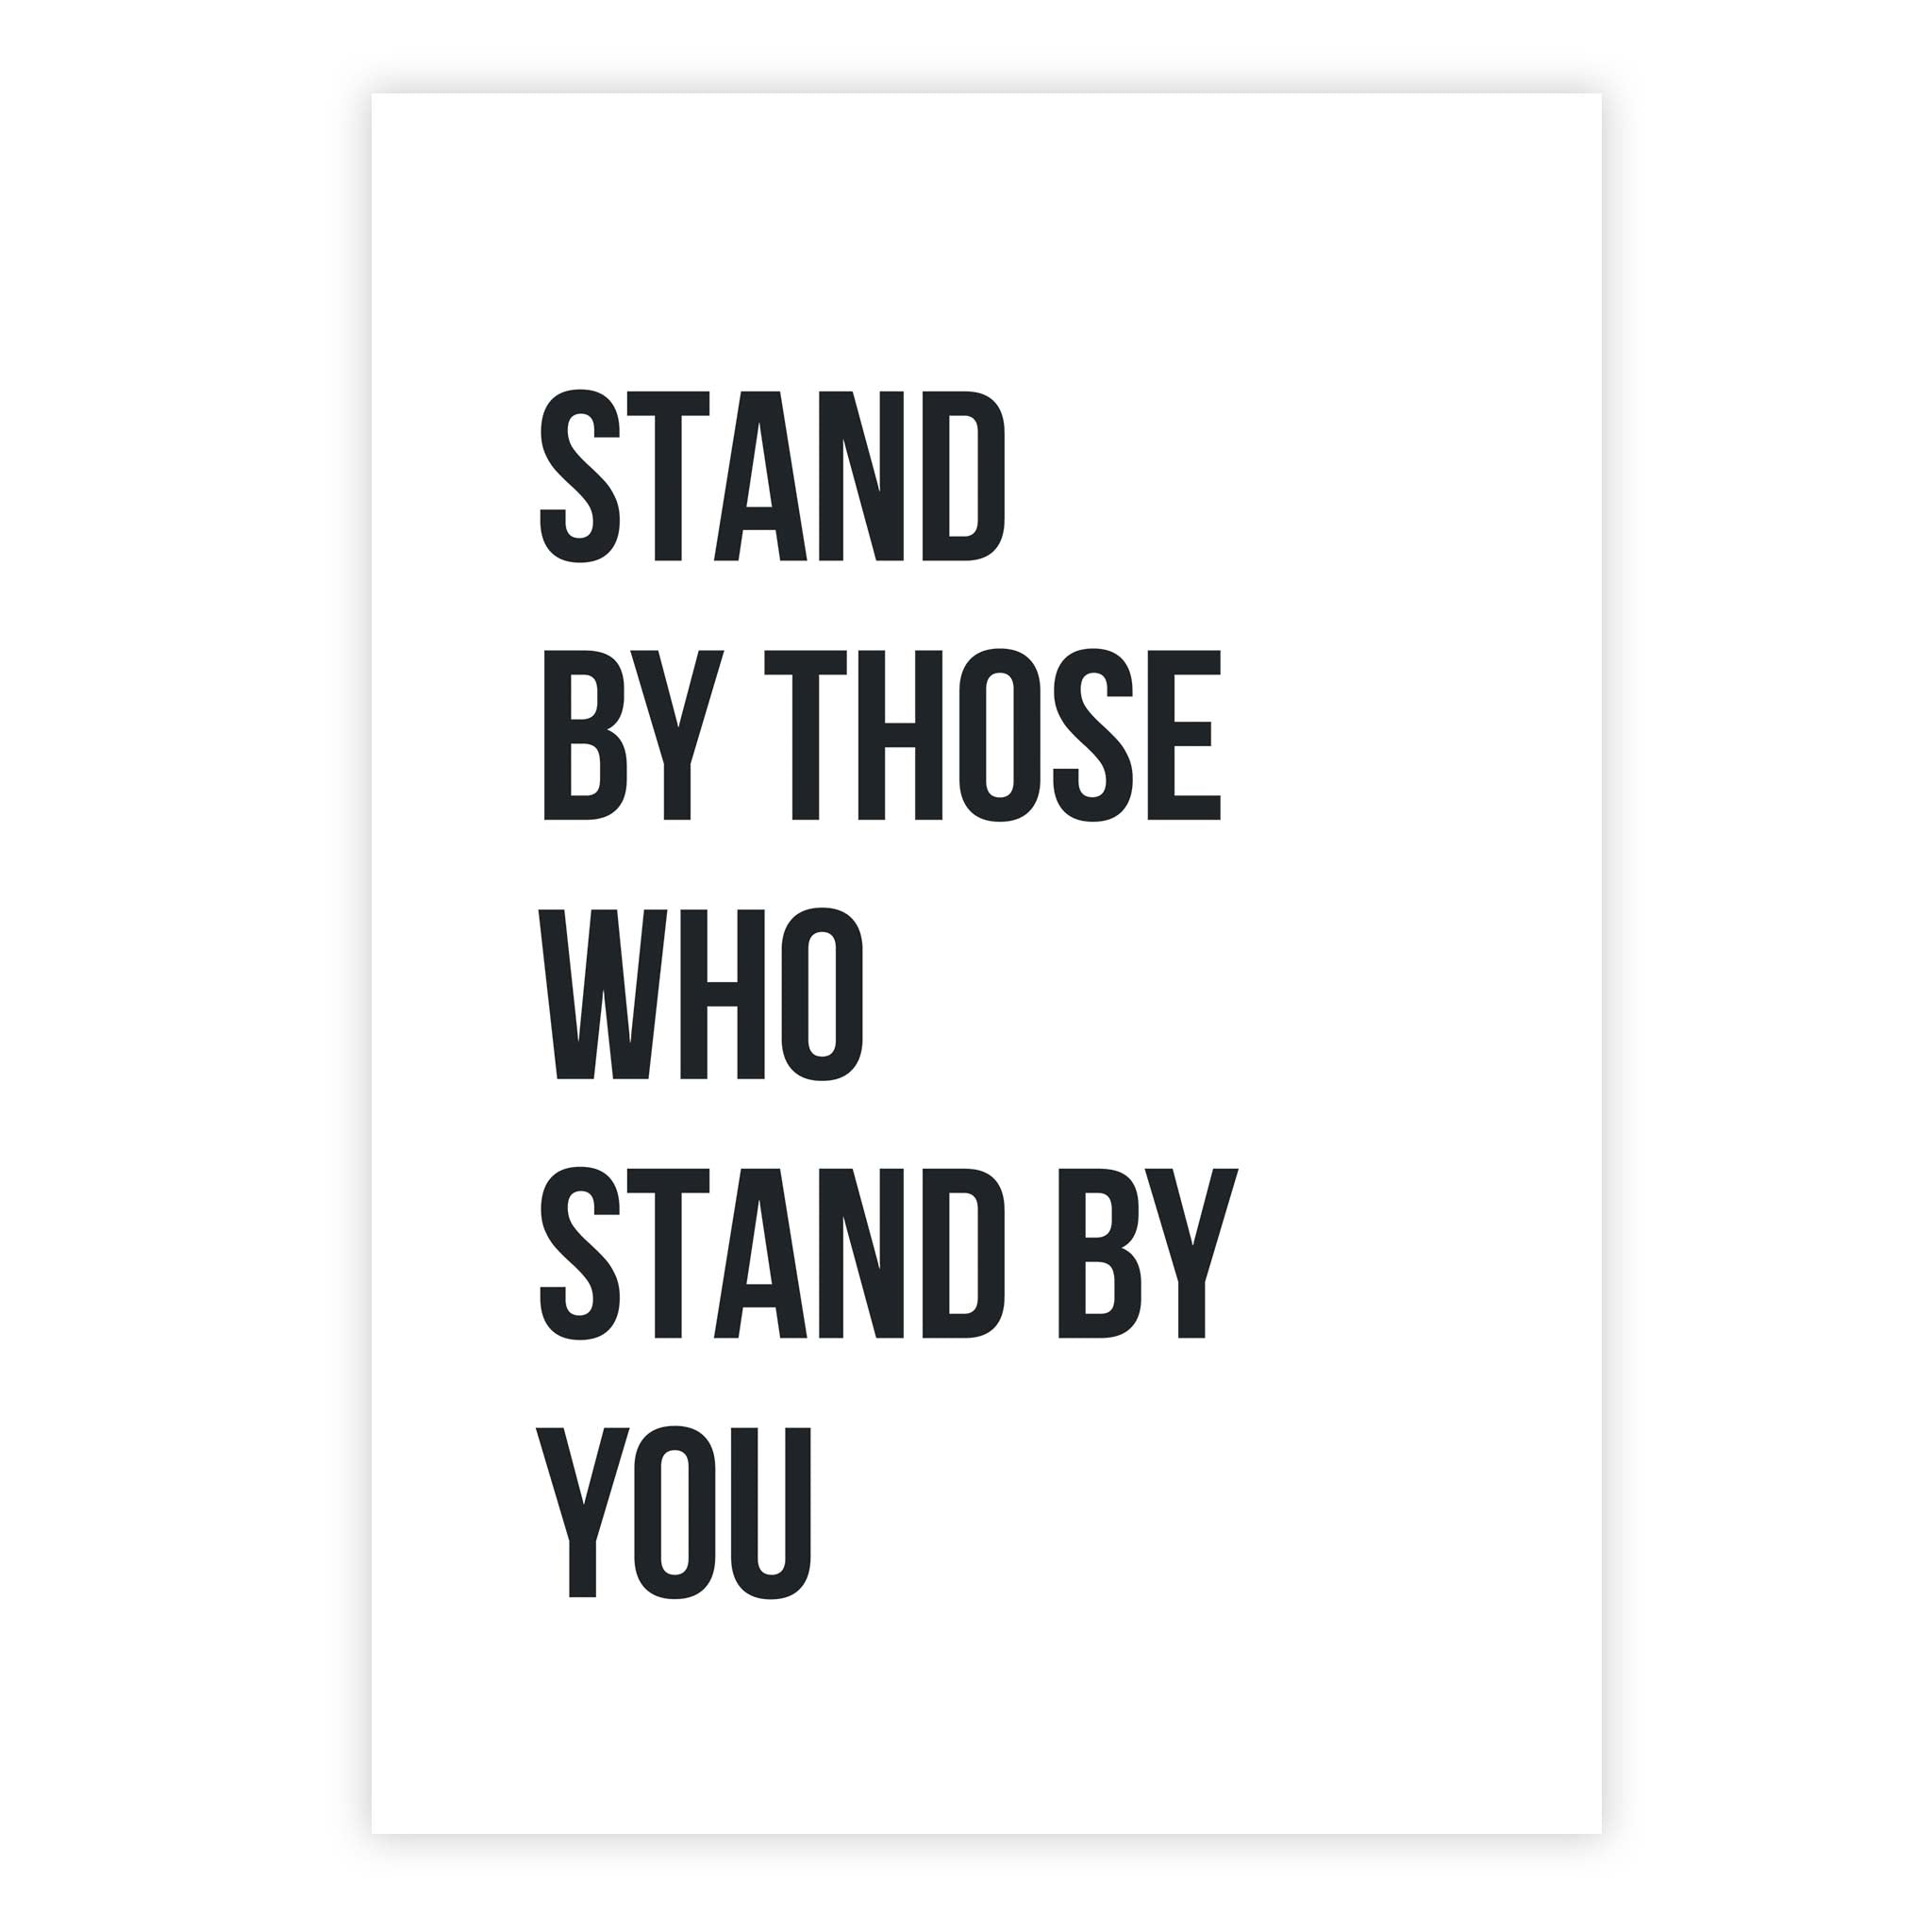 Stand by those who stand by you